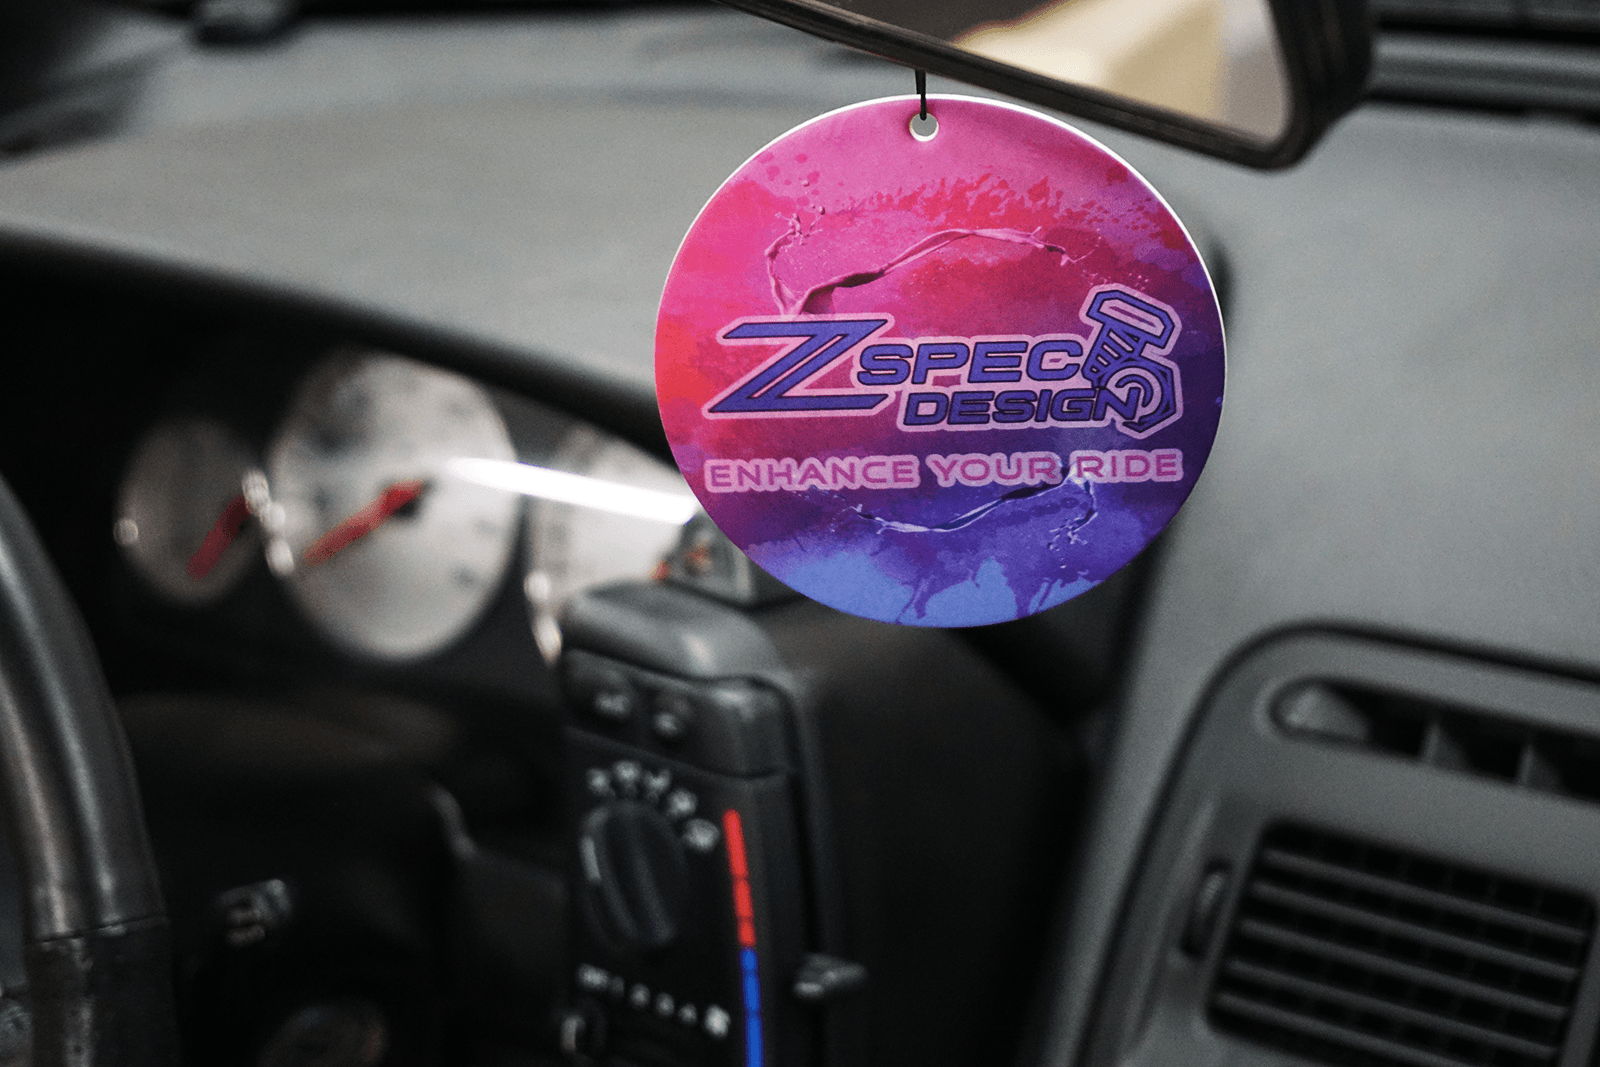 3" Round ZSPEC-Logo Citrus-Scented Air Freshener  3" round, double-sided  Simple addition to freshen up the interior of your ride.  Keywords Upgrade Performance Interior Enhance Your Ride